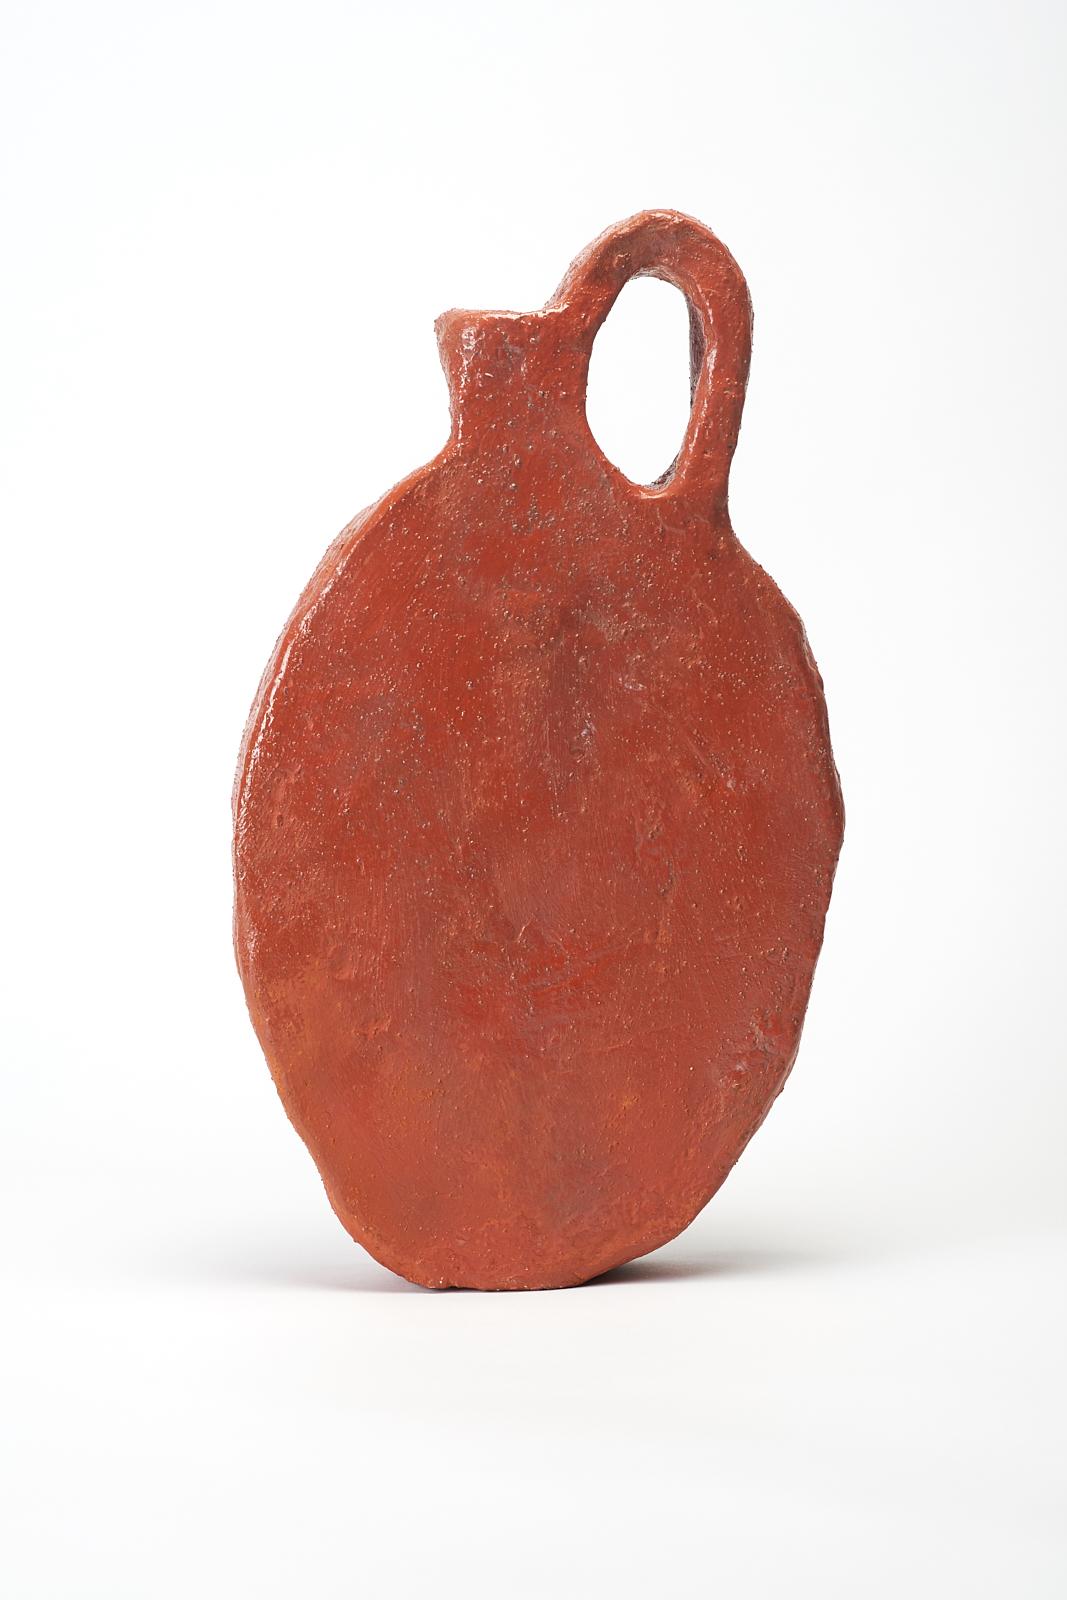 Furi Vase by Willem Van Hooff
Core Vessel Series
Dimensions: W 23 x D 10 x H 41 cm (Dimensions may vary as pieces are hand-made and might present slight variations in sizes)
Materials: Earthenware, ceramic, pigments, glaze

Core is a series of flat